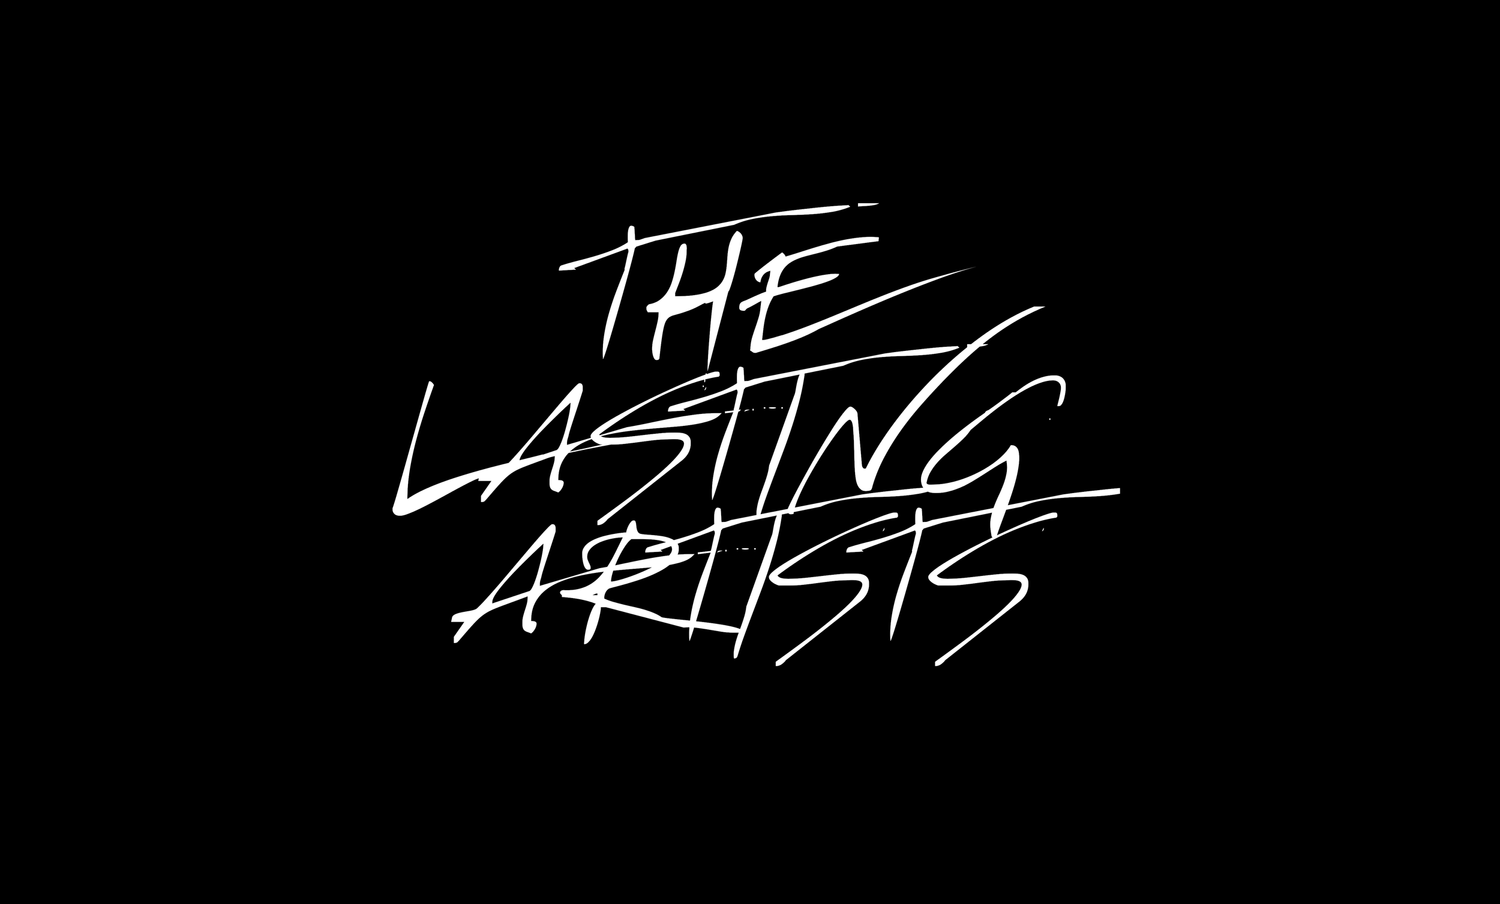 THE LASTING ARTISTS